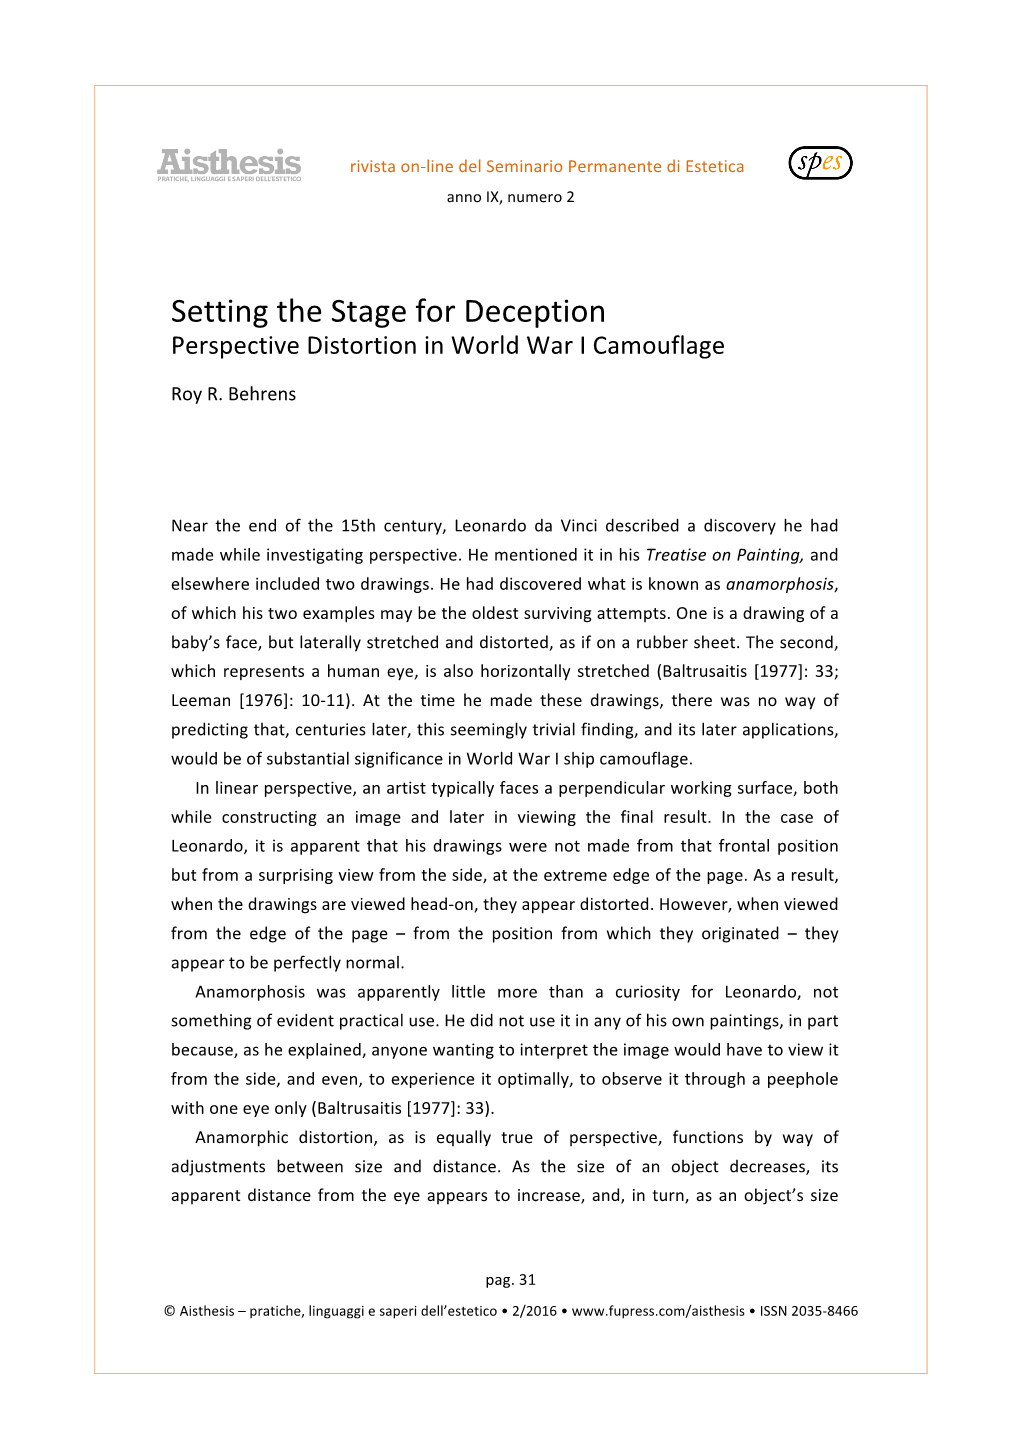 Setting the Stage for Deception Perspective Distortion in World War I Camouflage